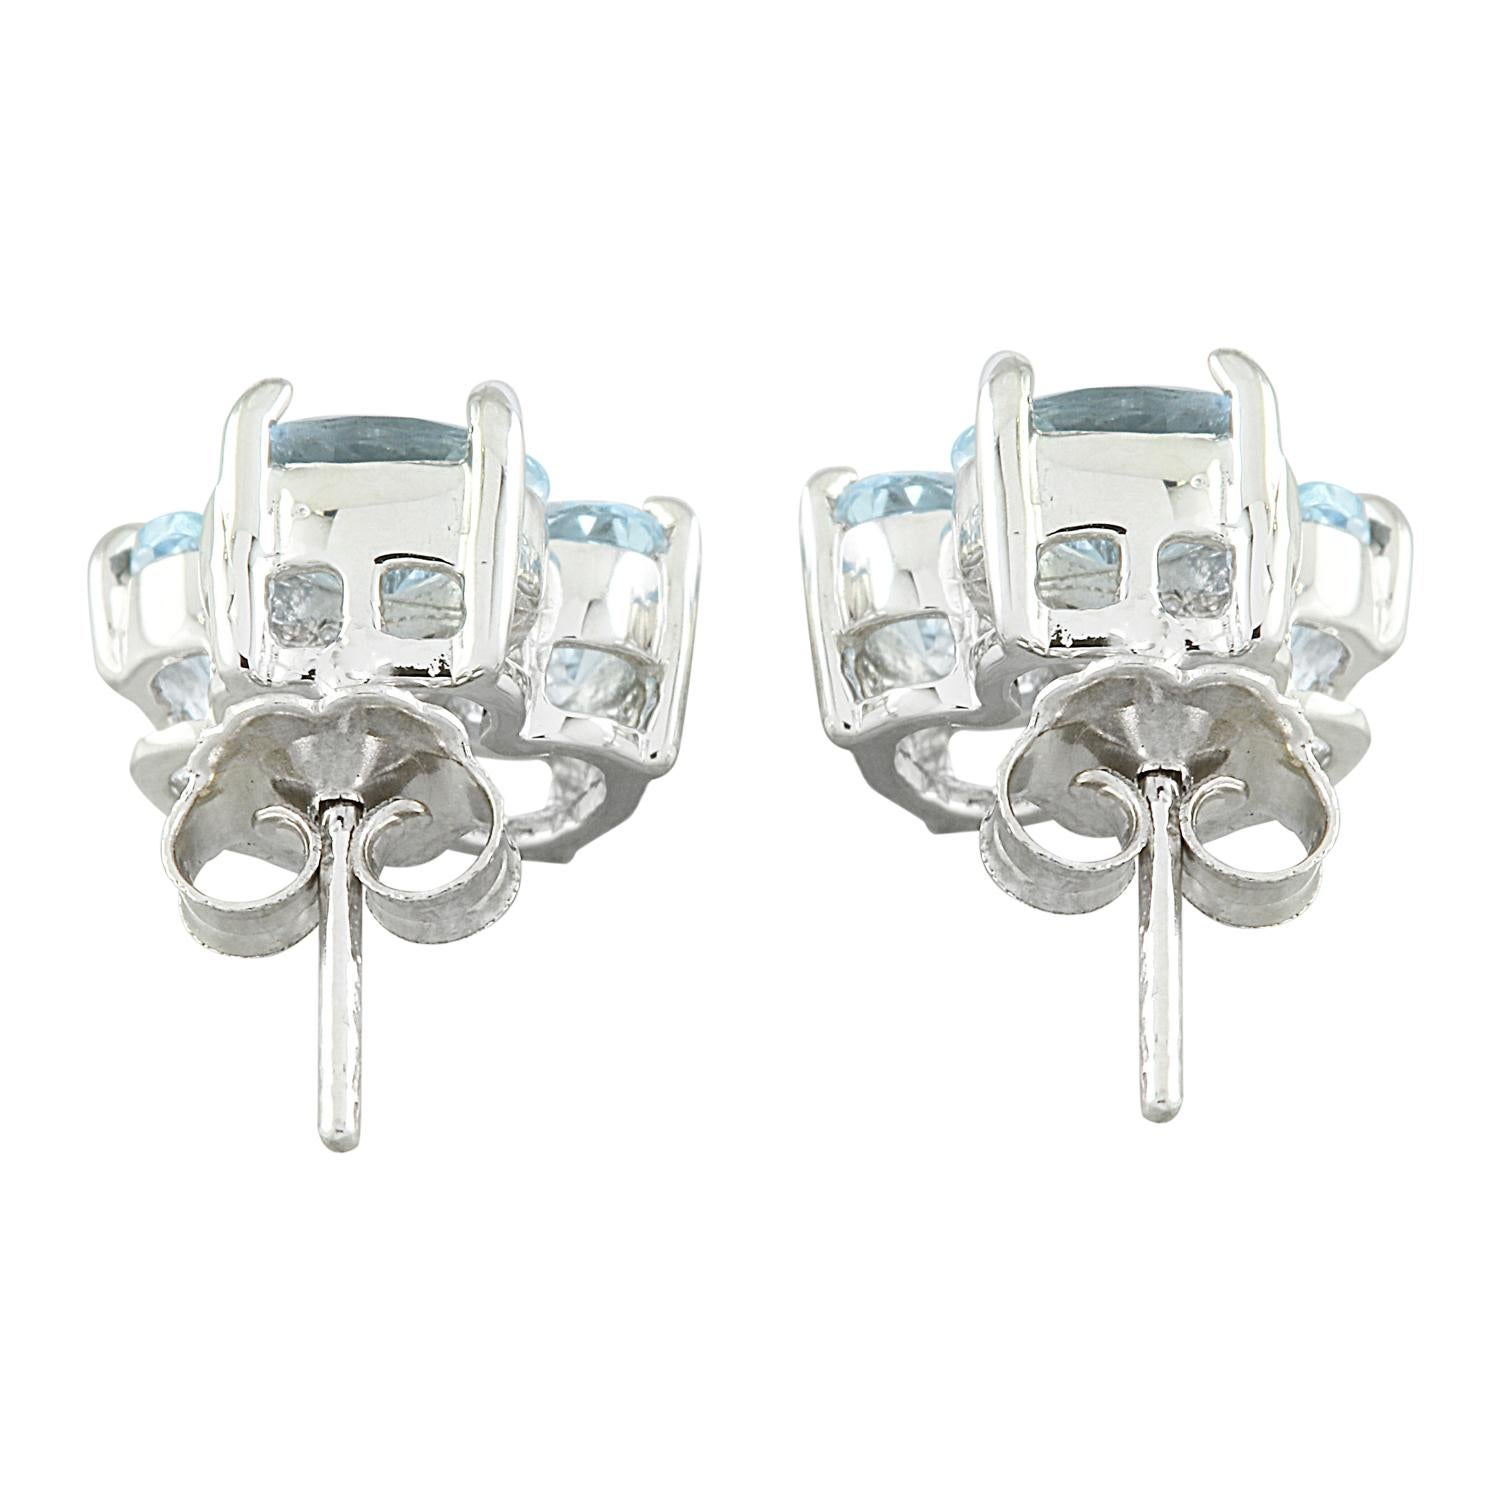 Oval Cut Exquisite Natural Aquamarine Diamond Earrings in 14K White Gold